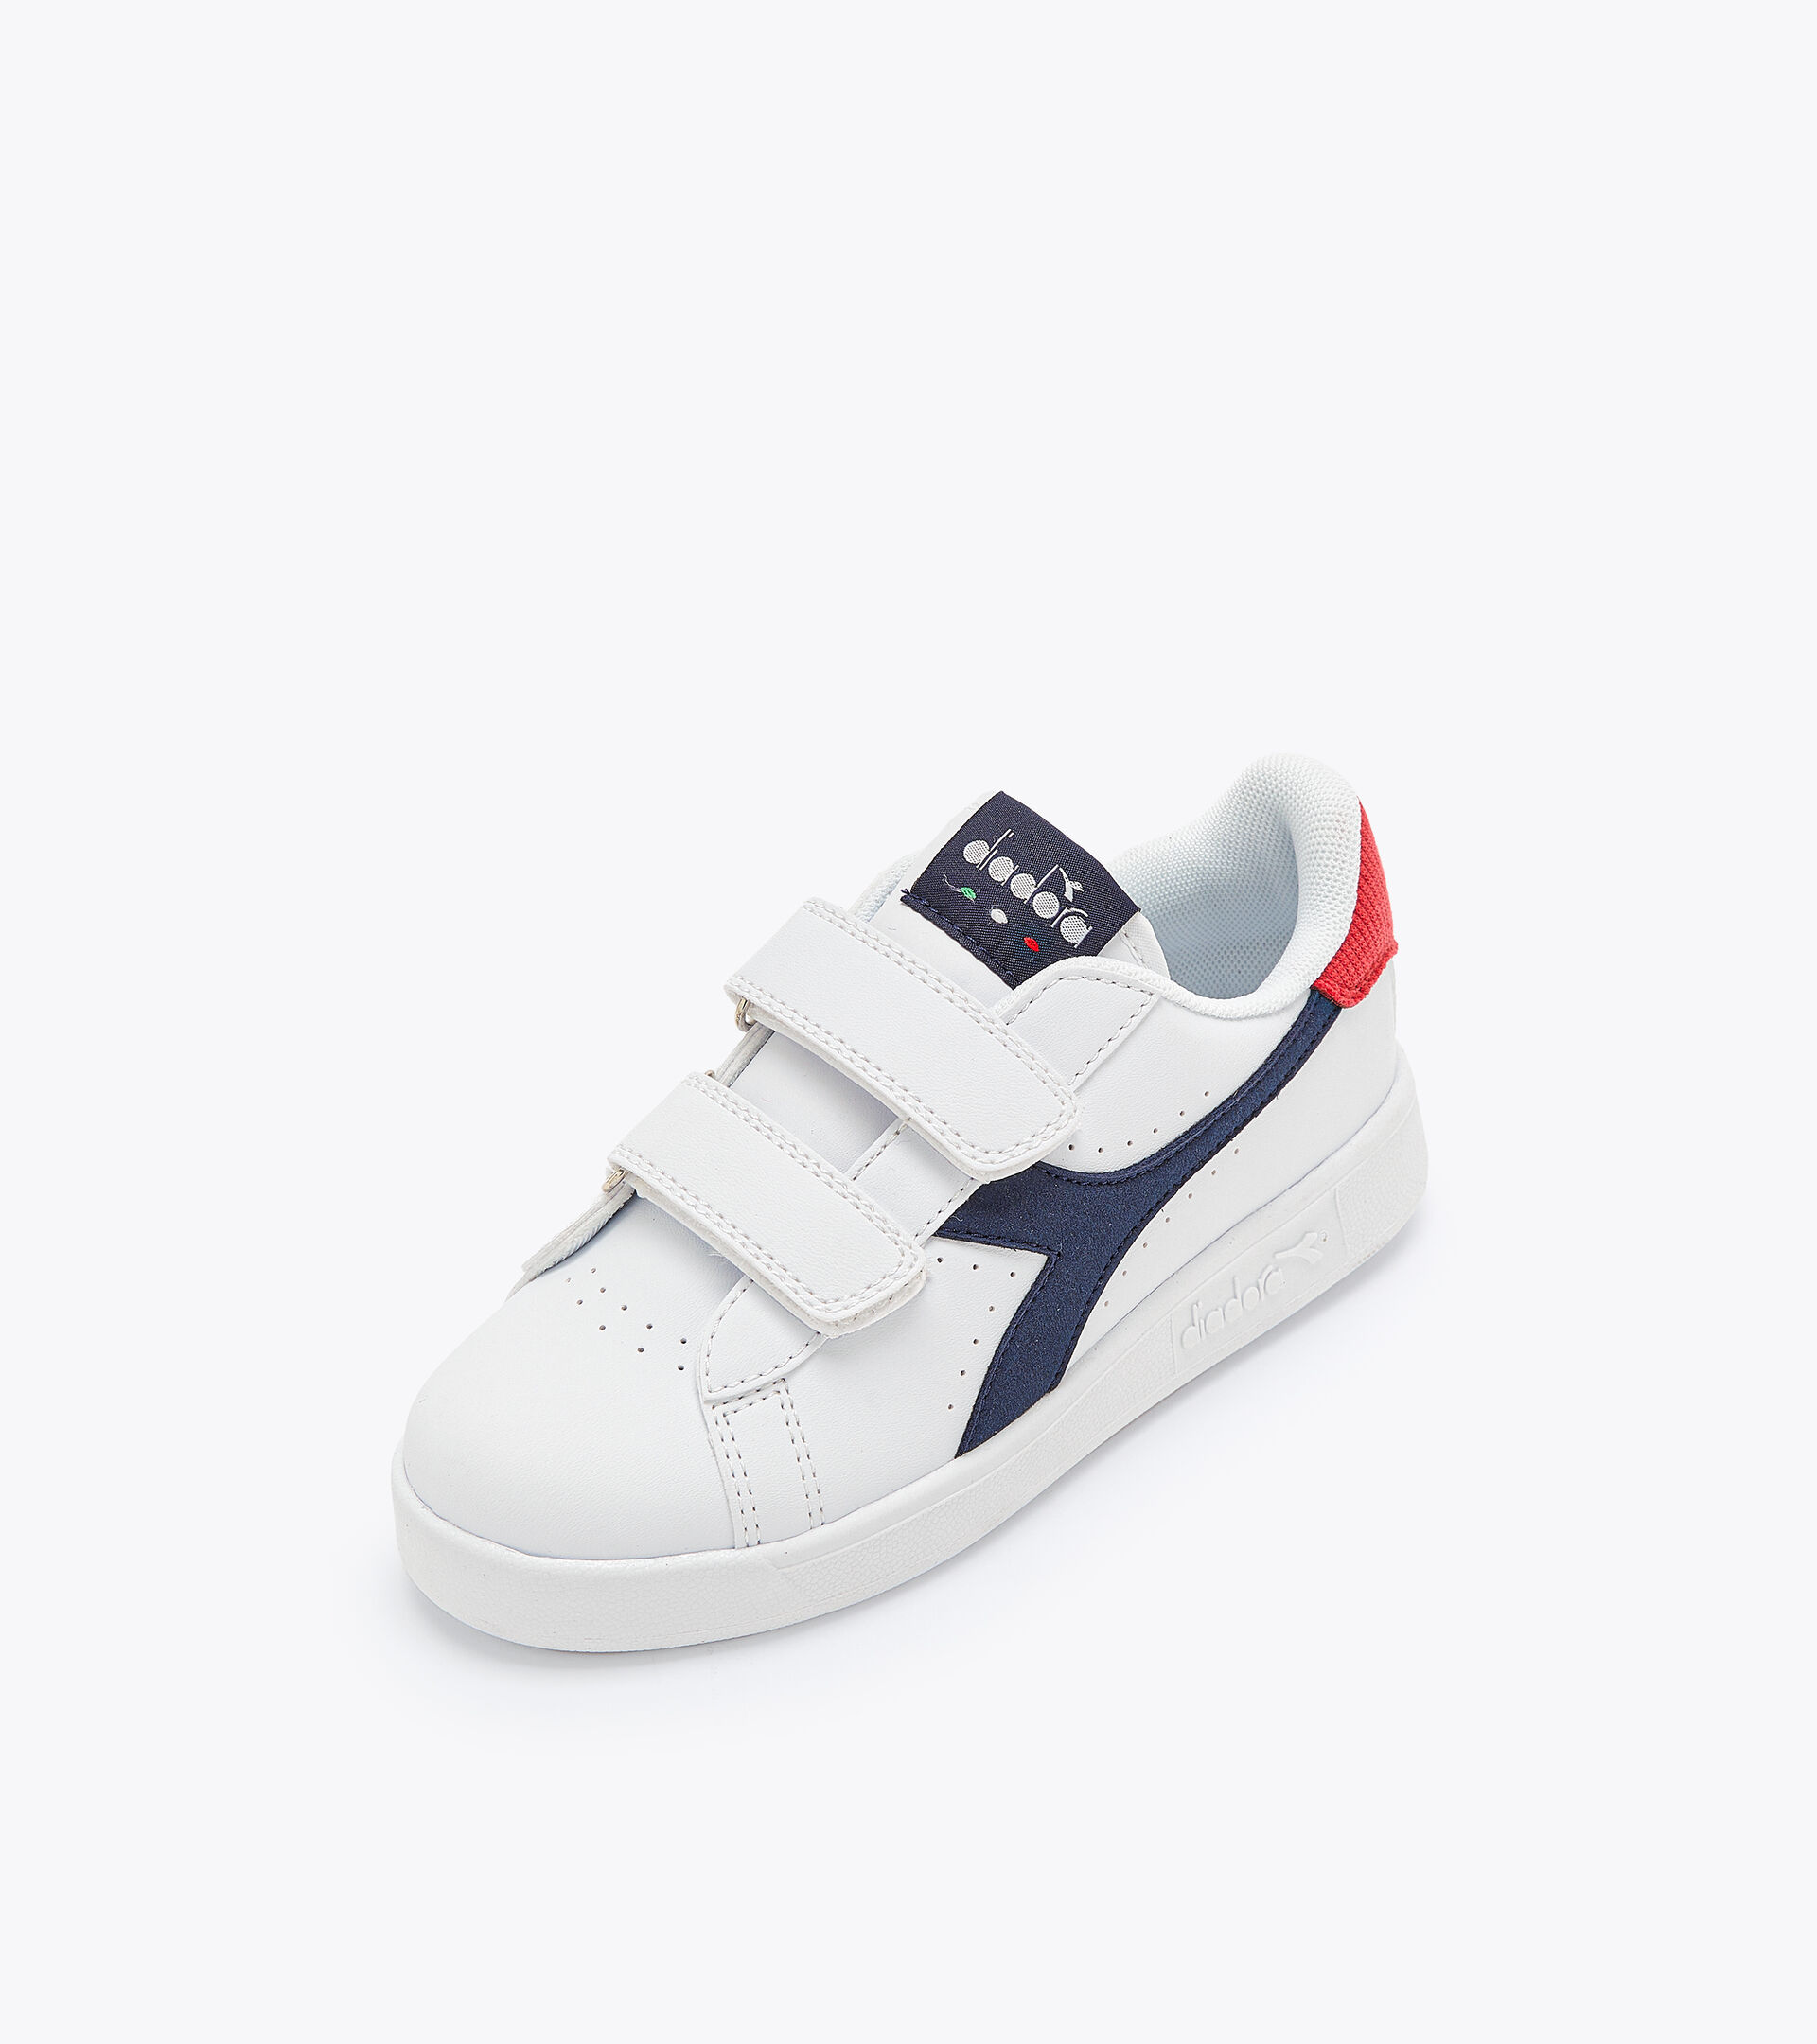 Sports shoes - Kids 4-8 years GAME P ACE PS WHITE/PEACOAT - Diadora